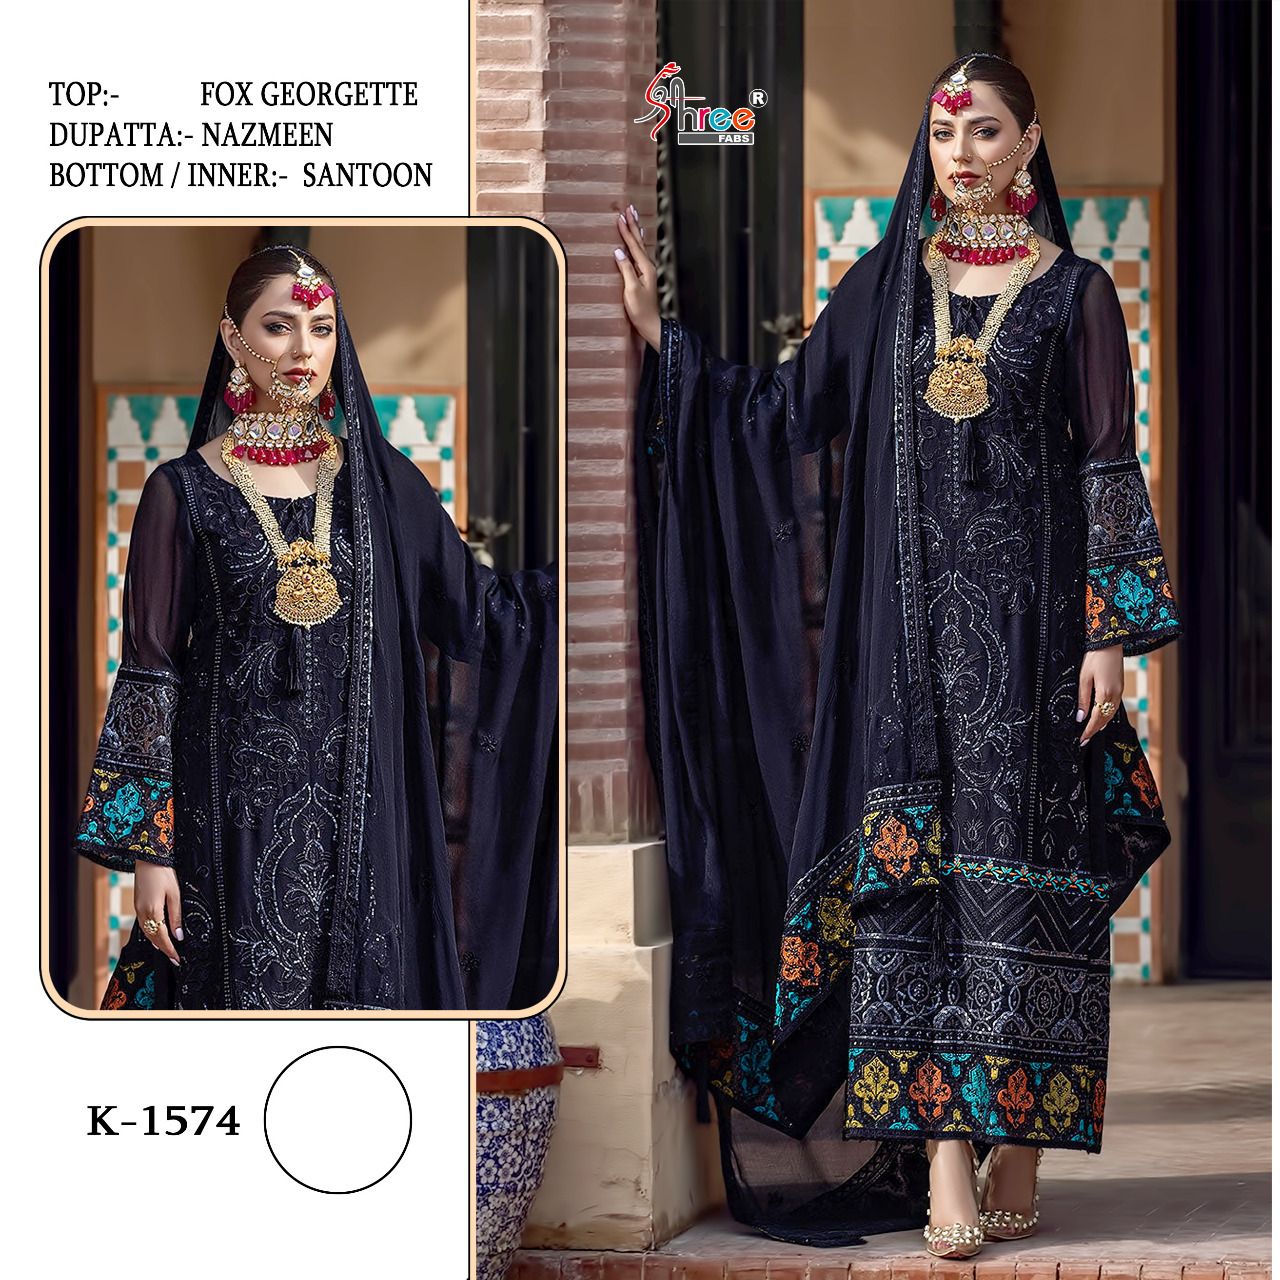 SHREE FABS K 1574 PAKISTANI SUITS IN LOWEST PRICE